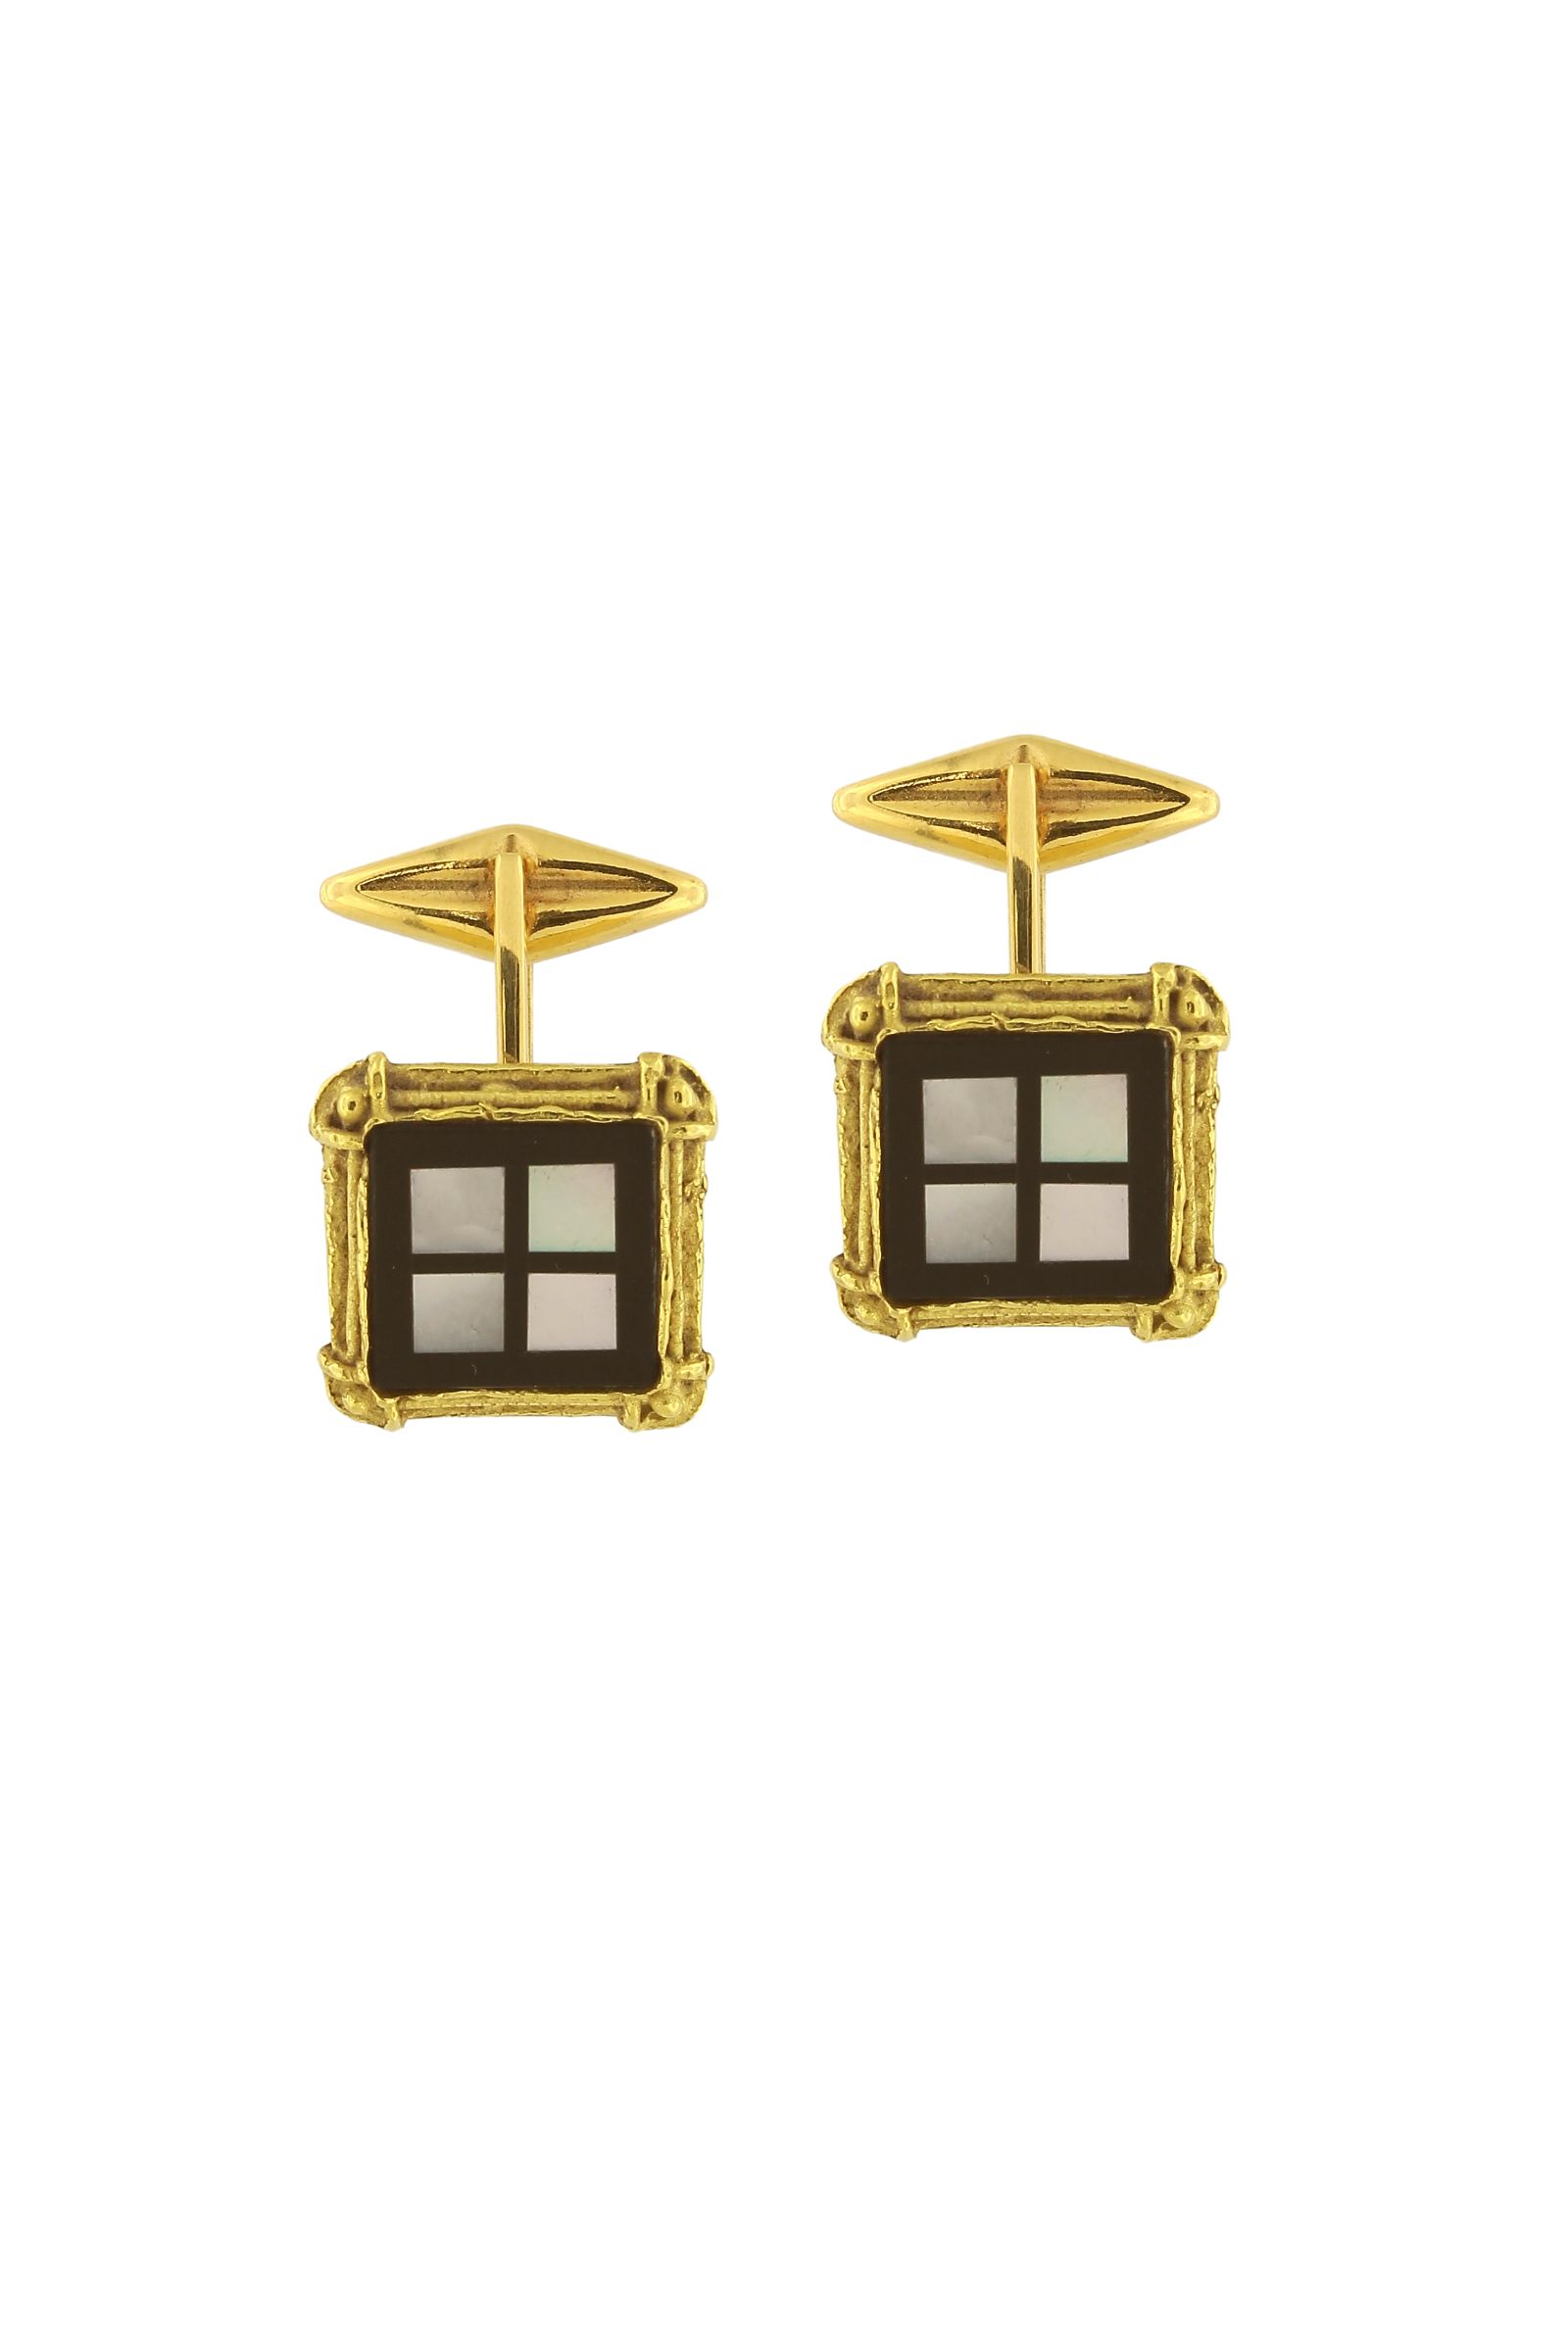 SF79B-18-Kt-Yellow-Gold-Cufflinks-with-Onyx-and-Nacre-1_ok